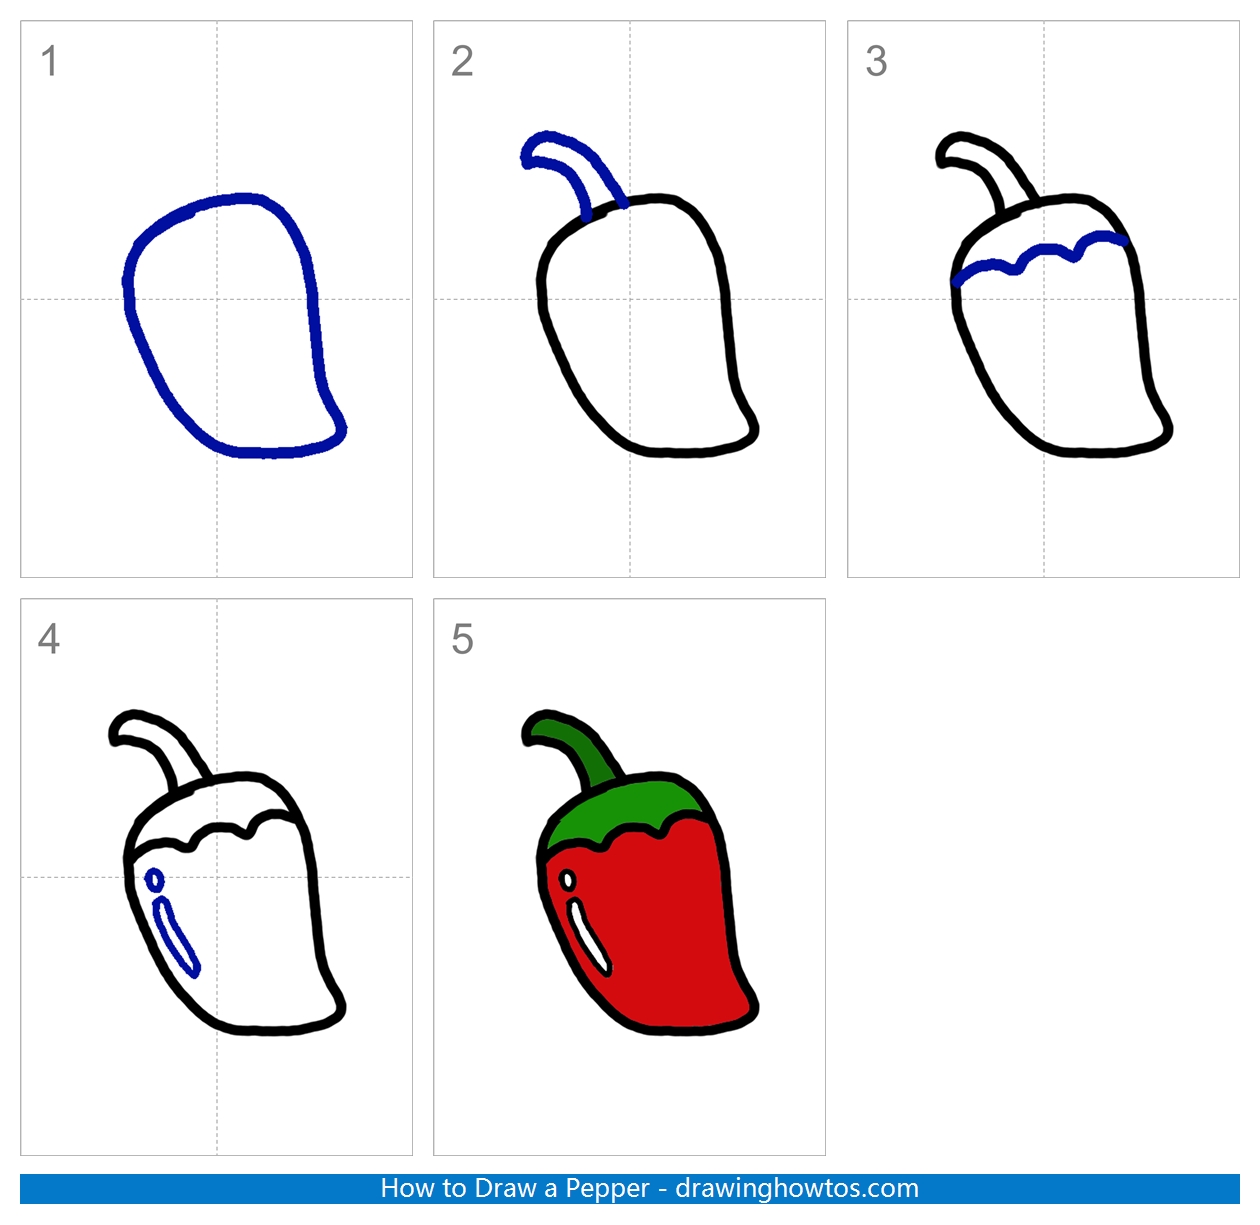 How to Draw a Pepper Step by Step